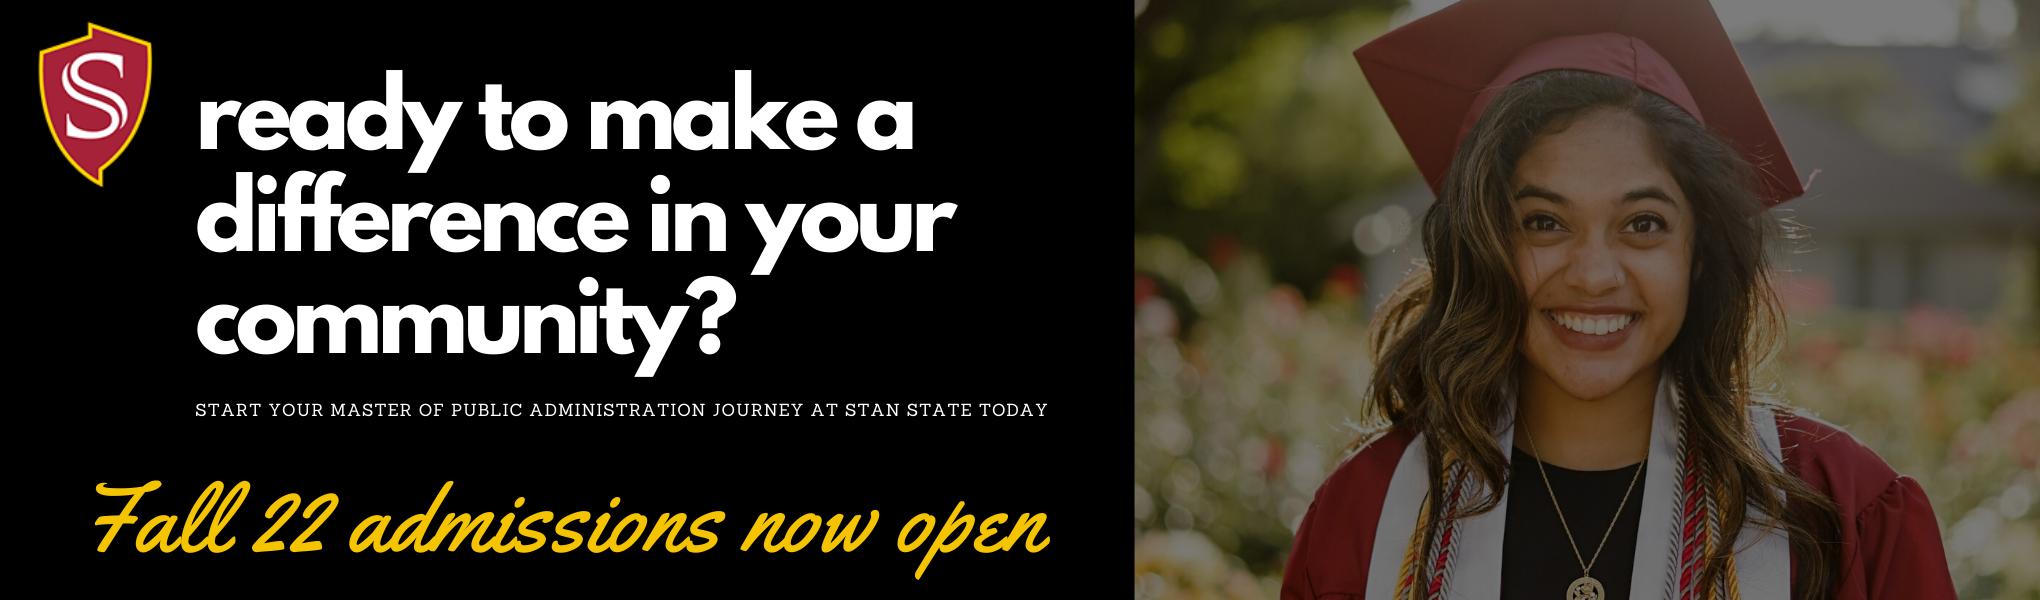 Ready to make a difference in your community? Start your Master of Public Administration journey at Stan State today. Fall 2022 admissions now open!